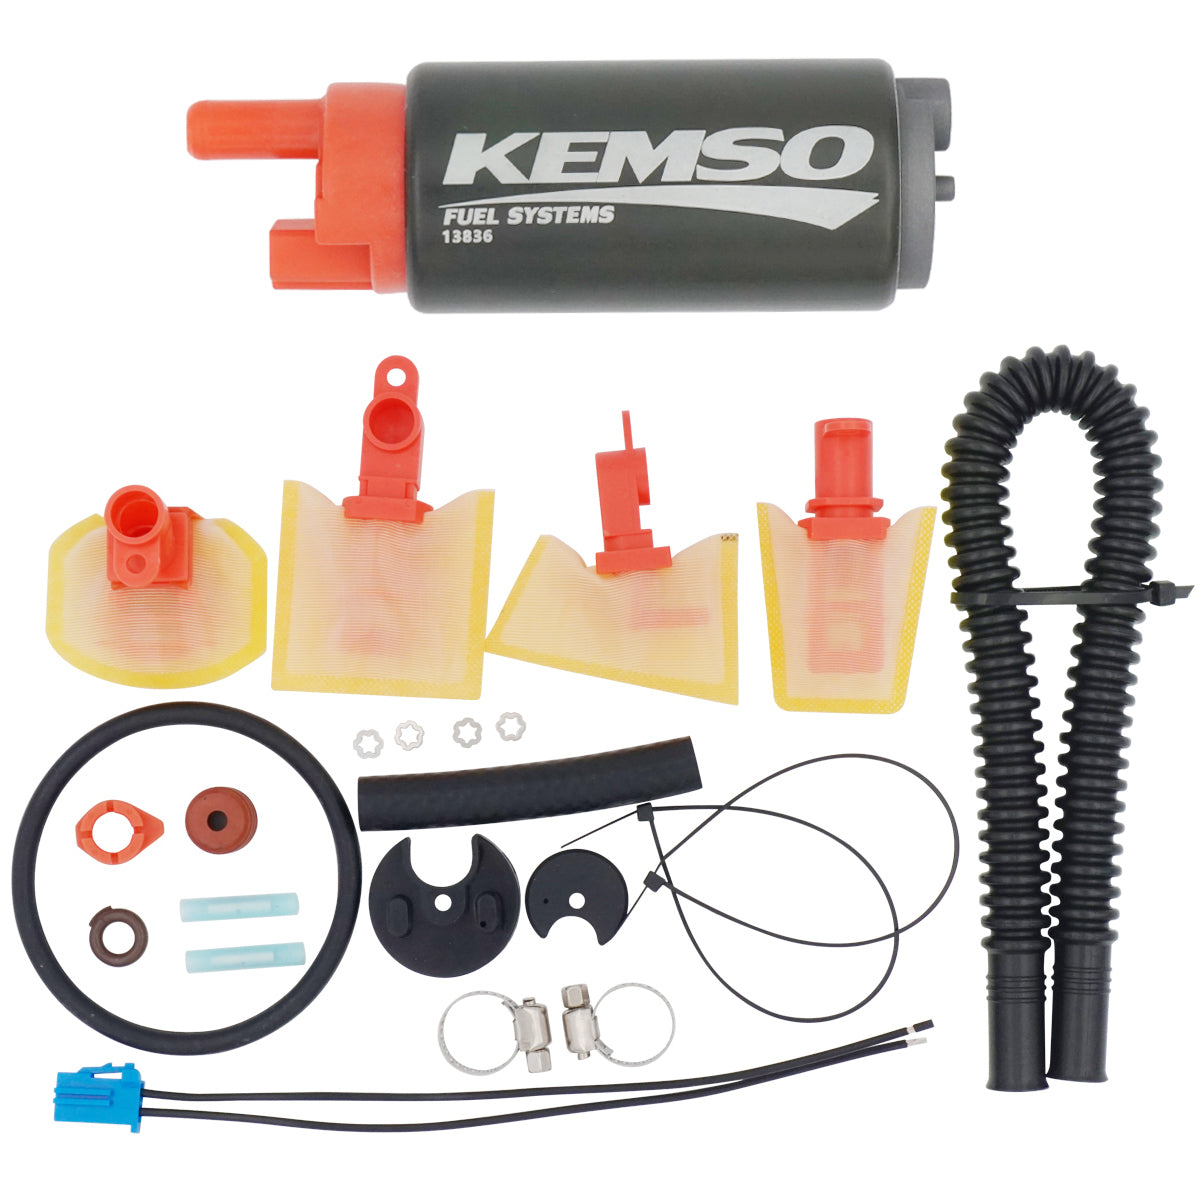 KEMSO Fuel Systems | OEM & Performance Fuel System Parts